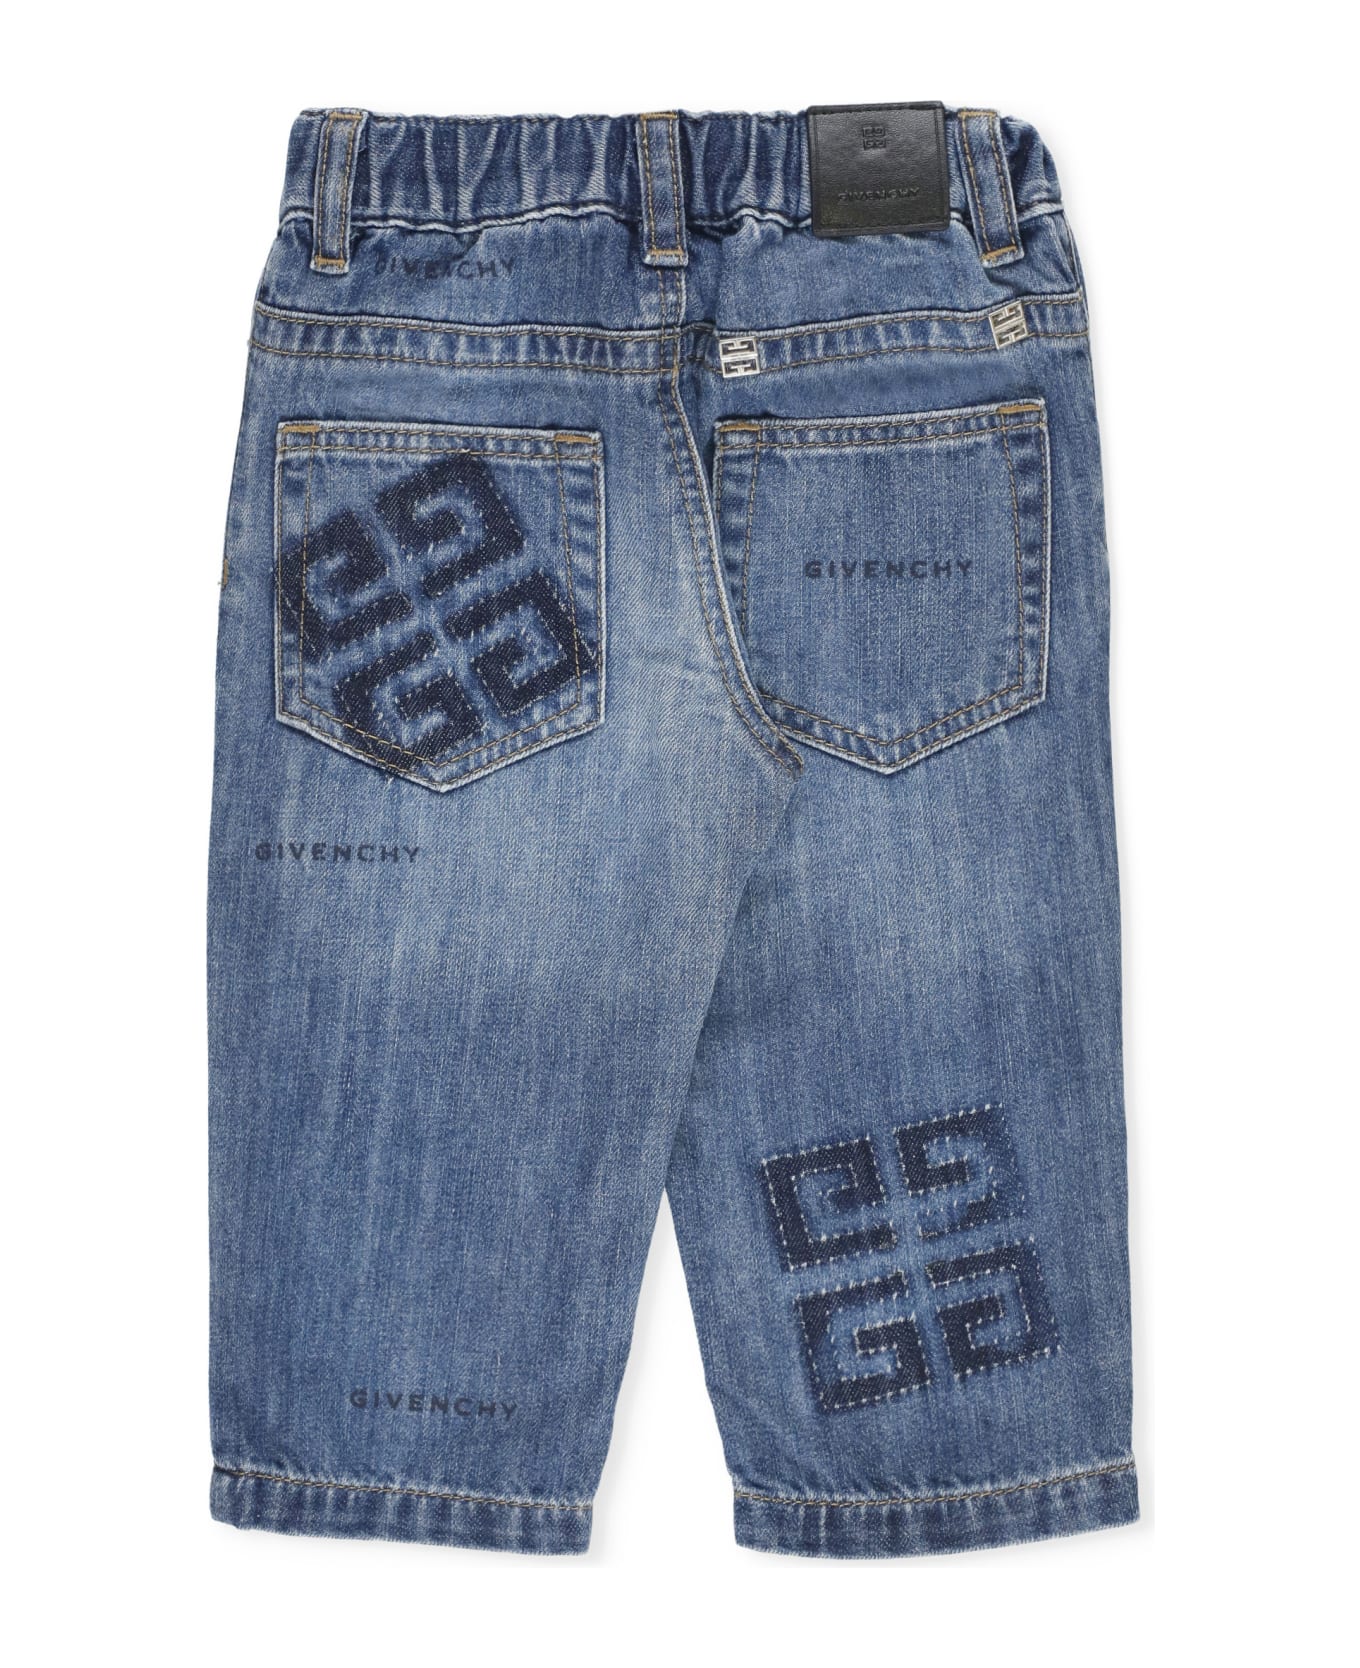 Givenchy Cotton Jeans - Blue ボトムス